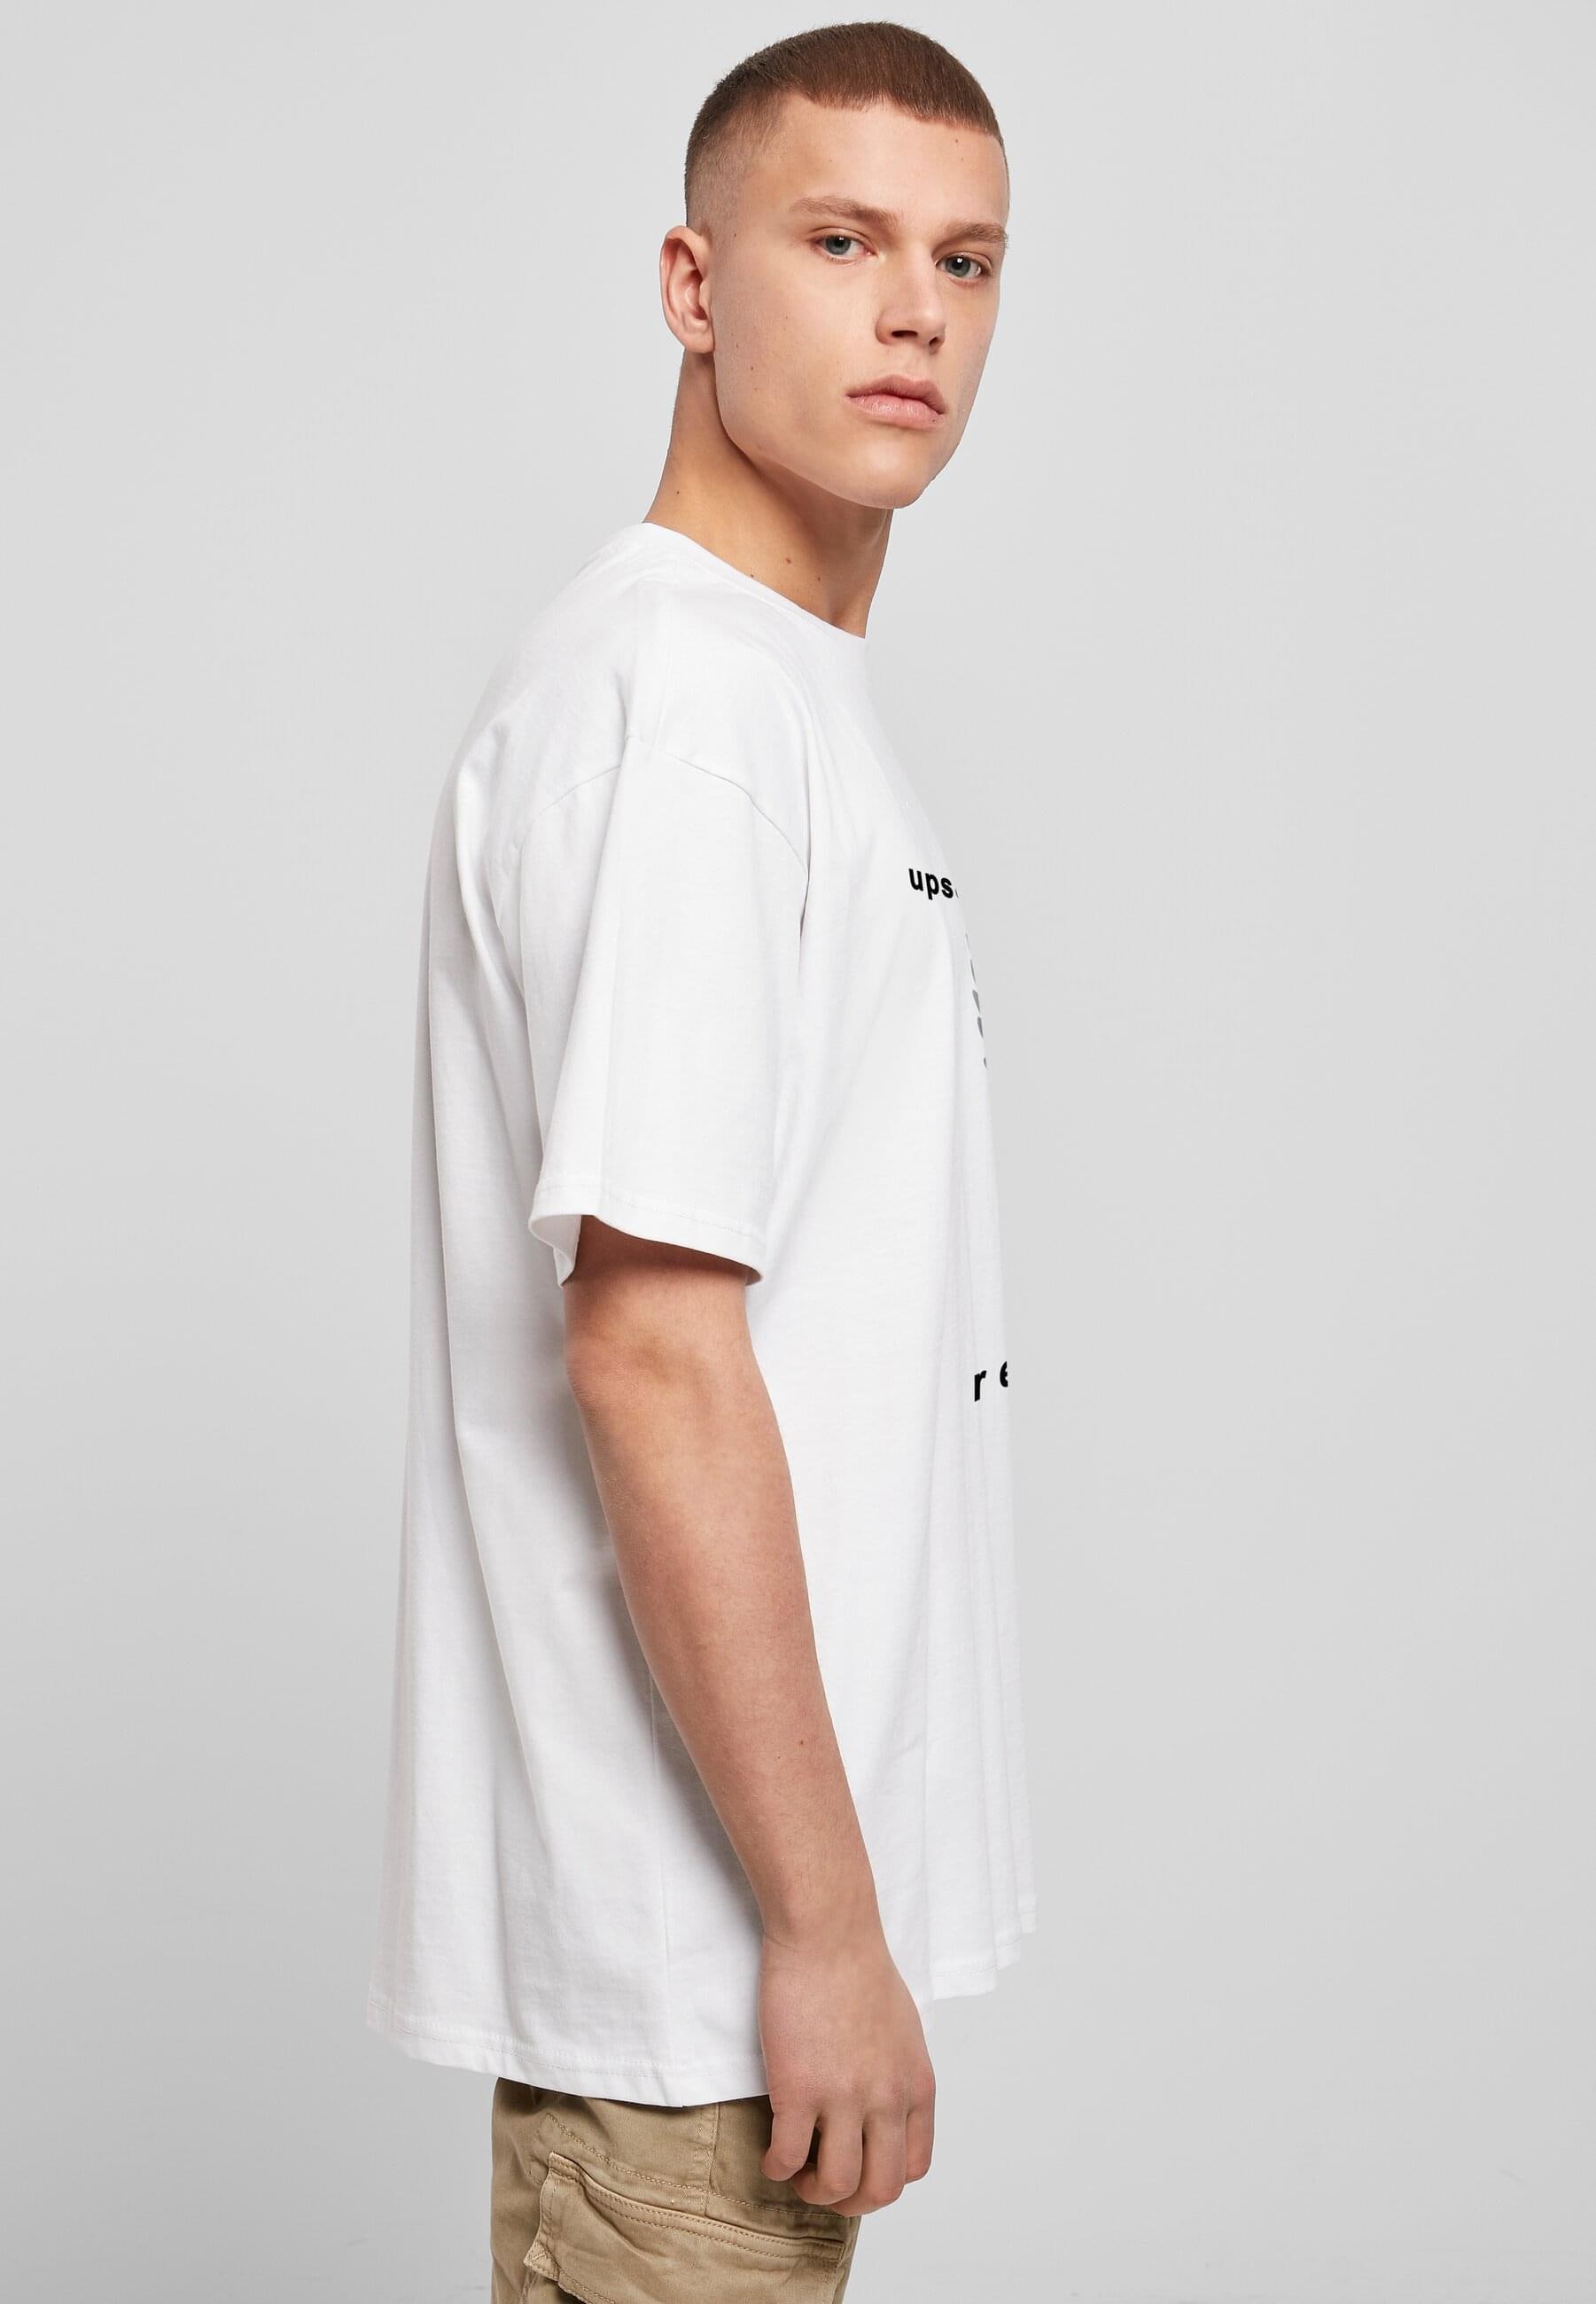 tlg.) Oversize T-Shirt (1 Upscale »Unisex fly BAUR Tee«, Mister | by ▷ Tee to Ready kaufen